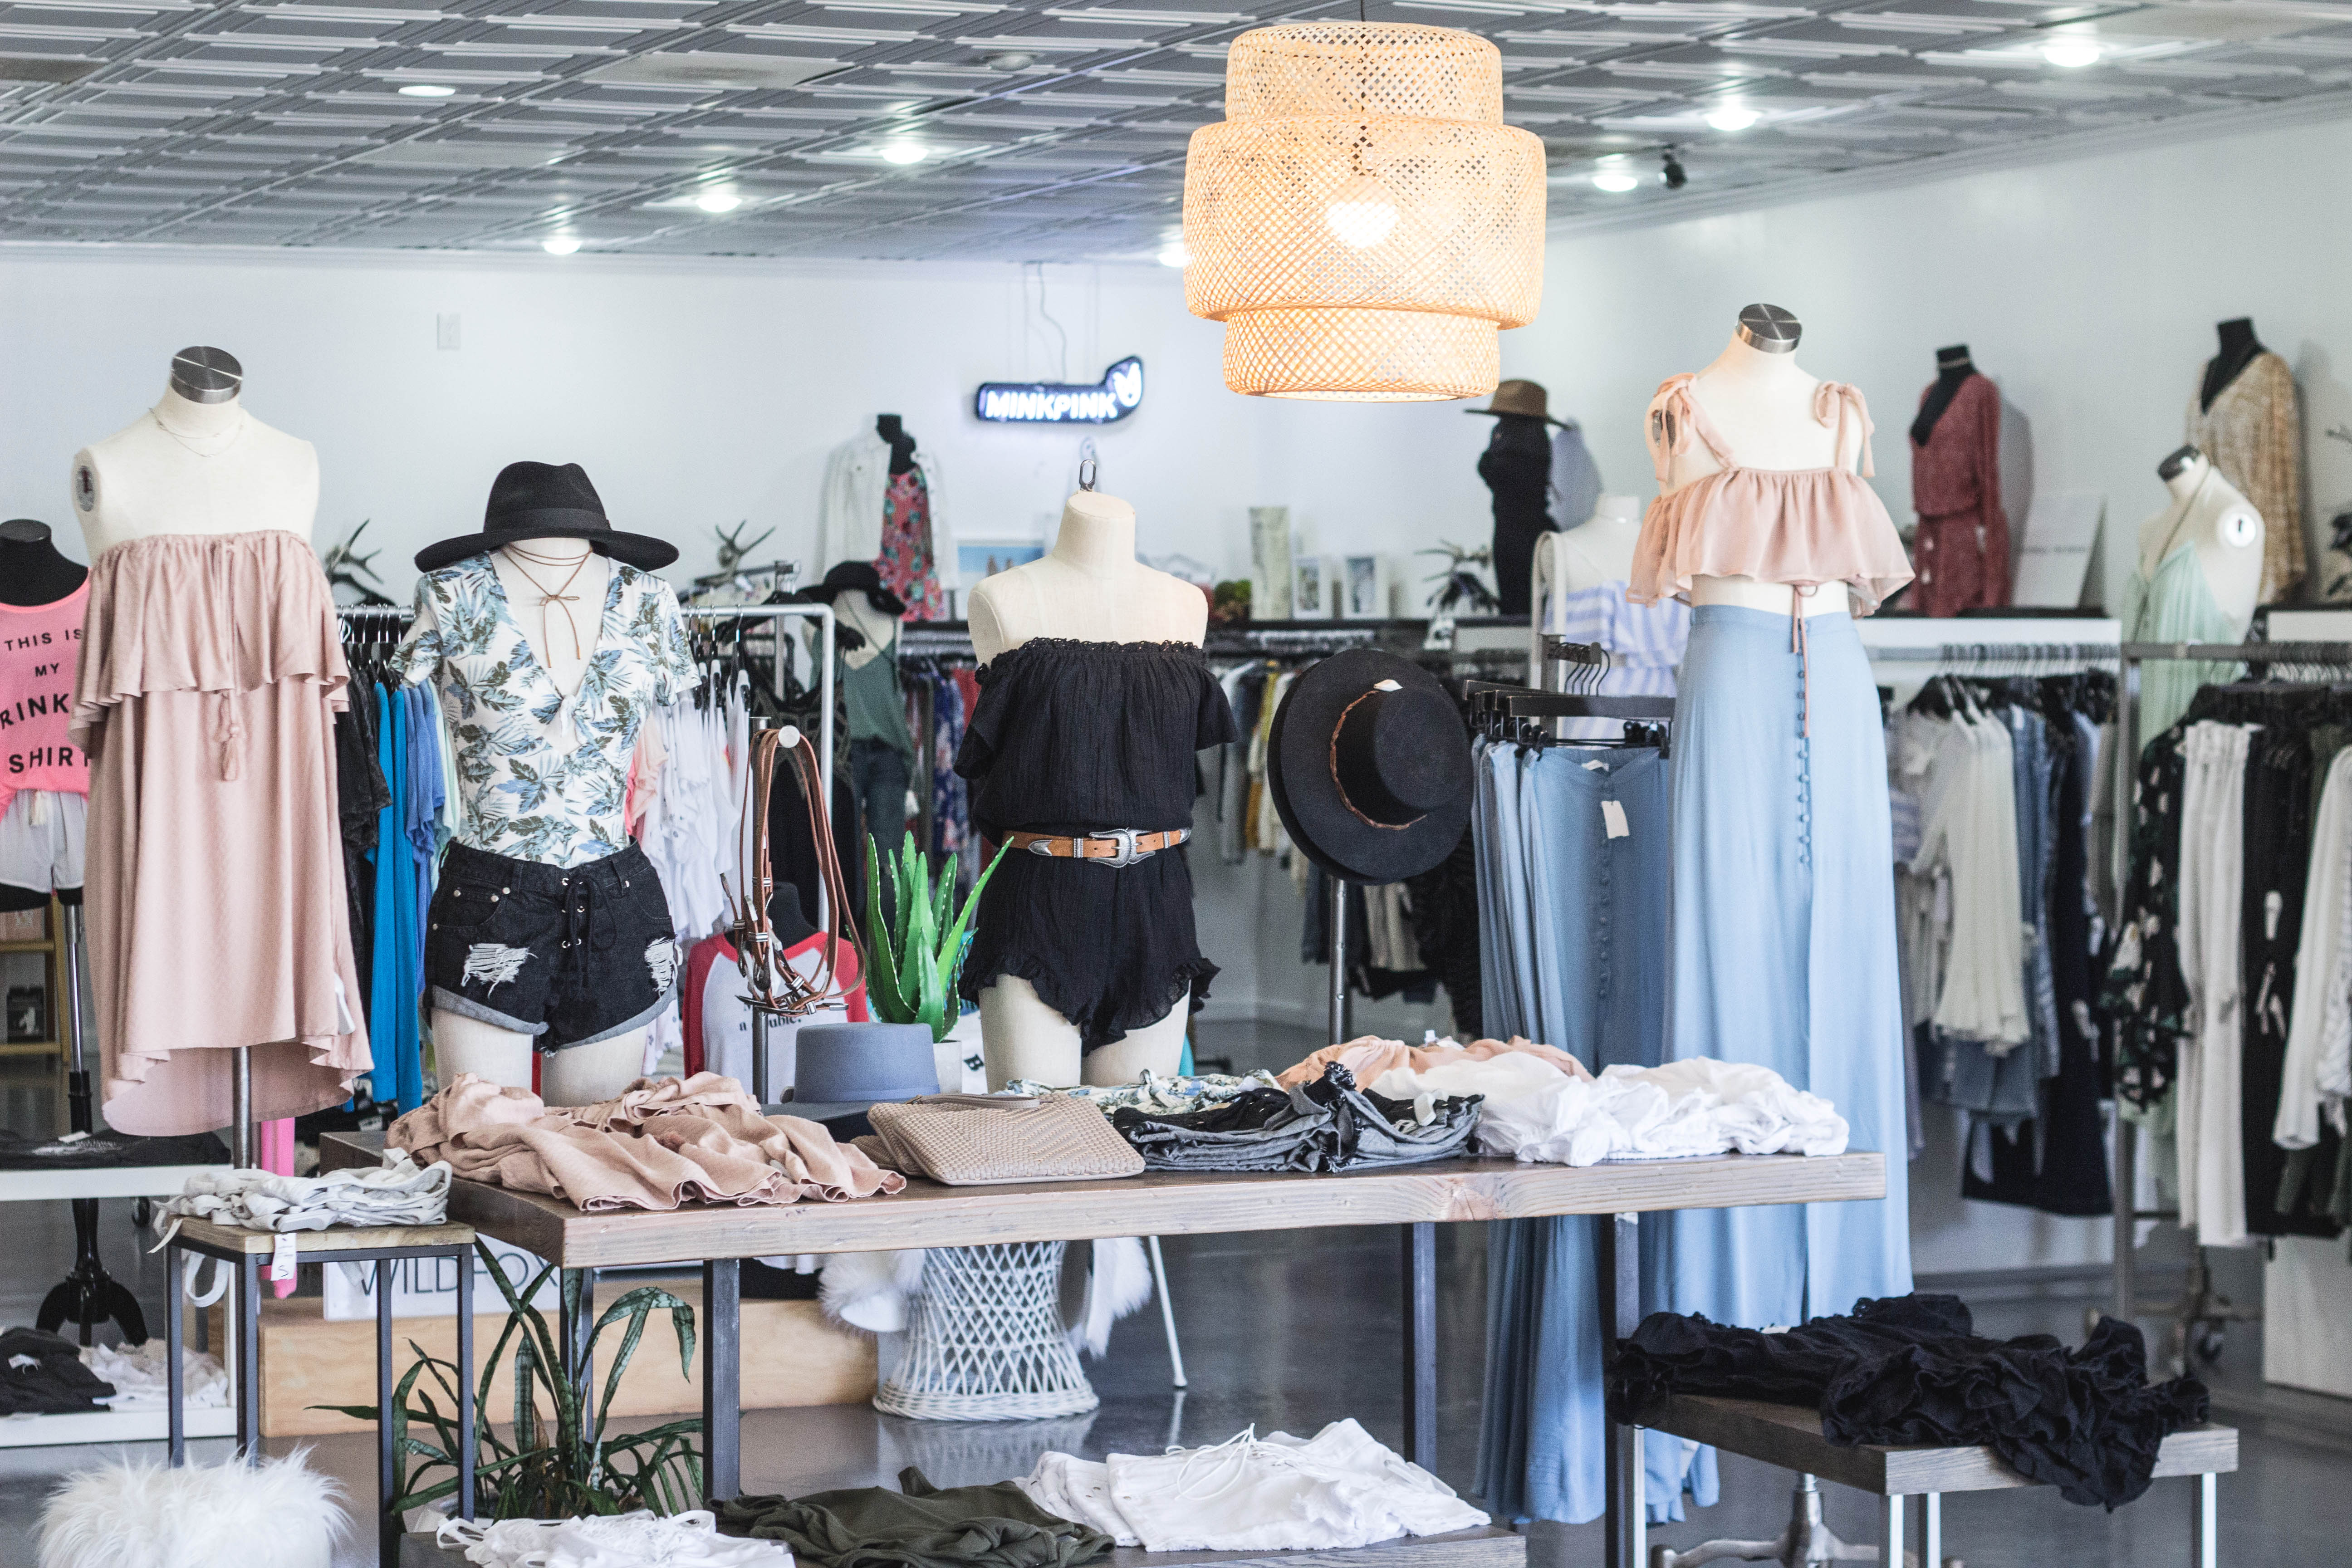 Best Boutiques For Women In Orange County - CBS Los Angeles